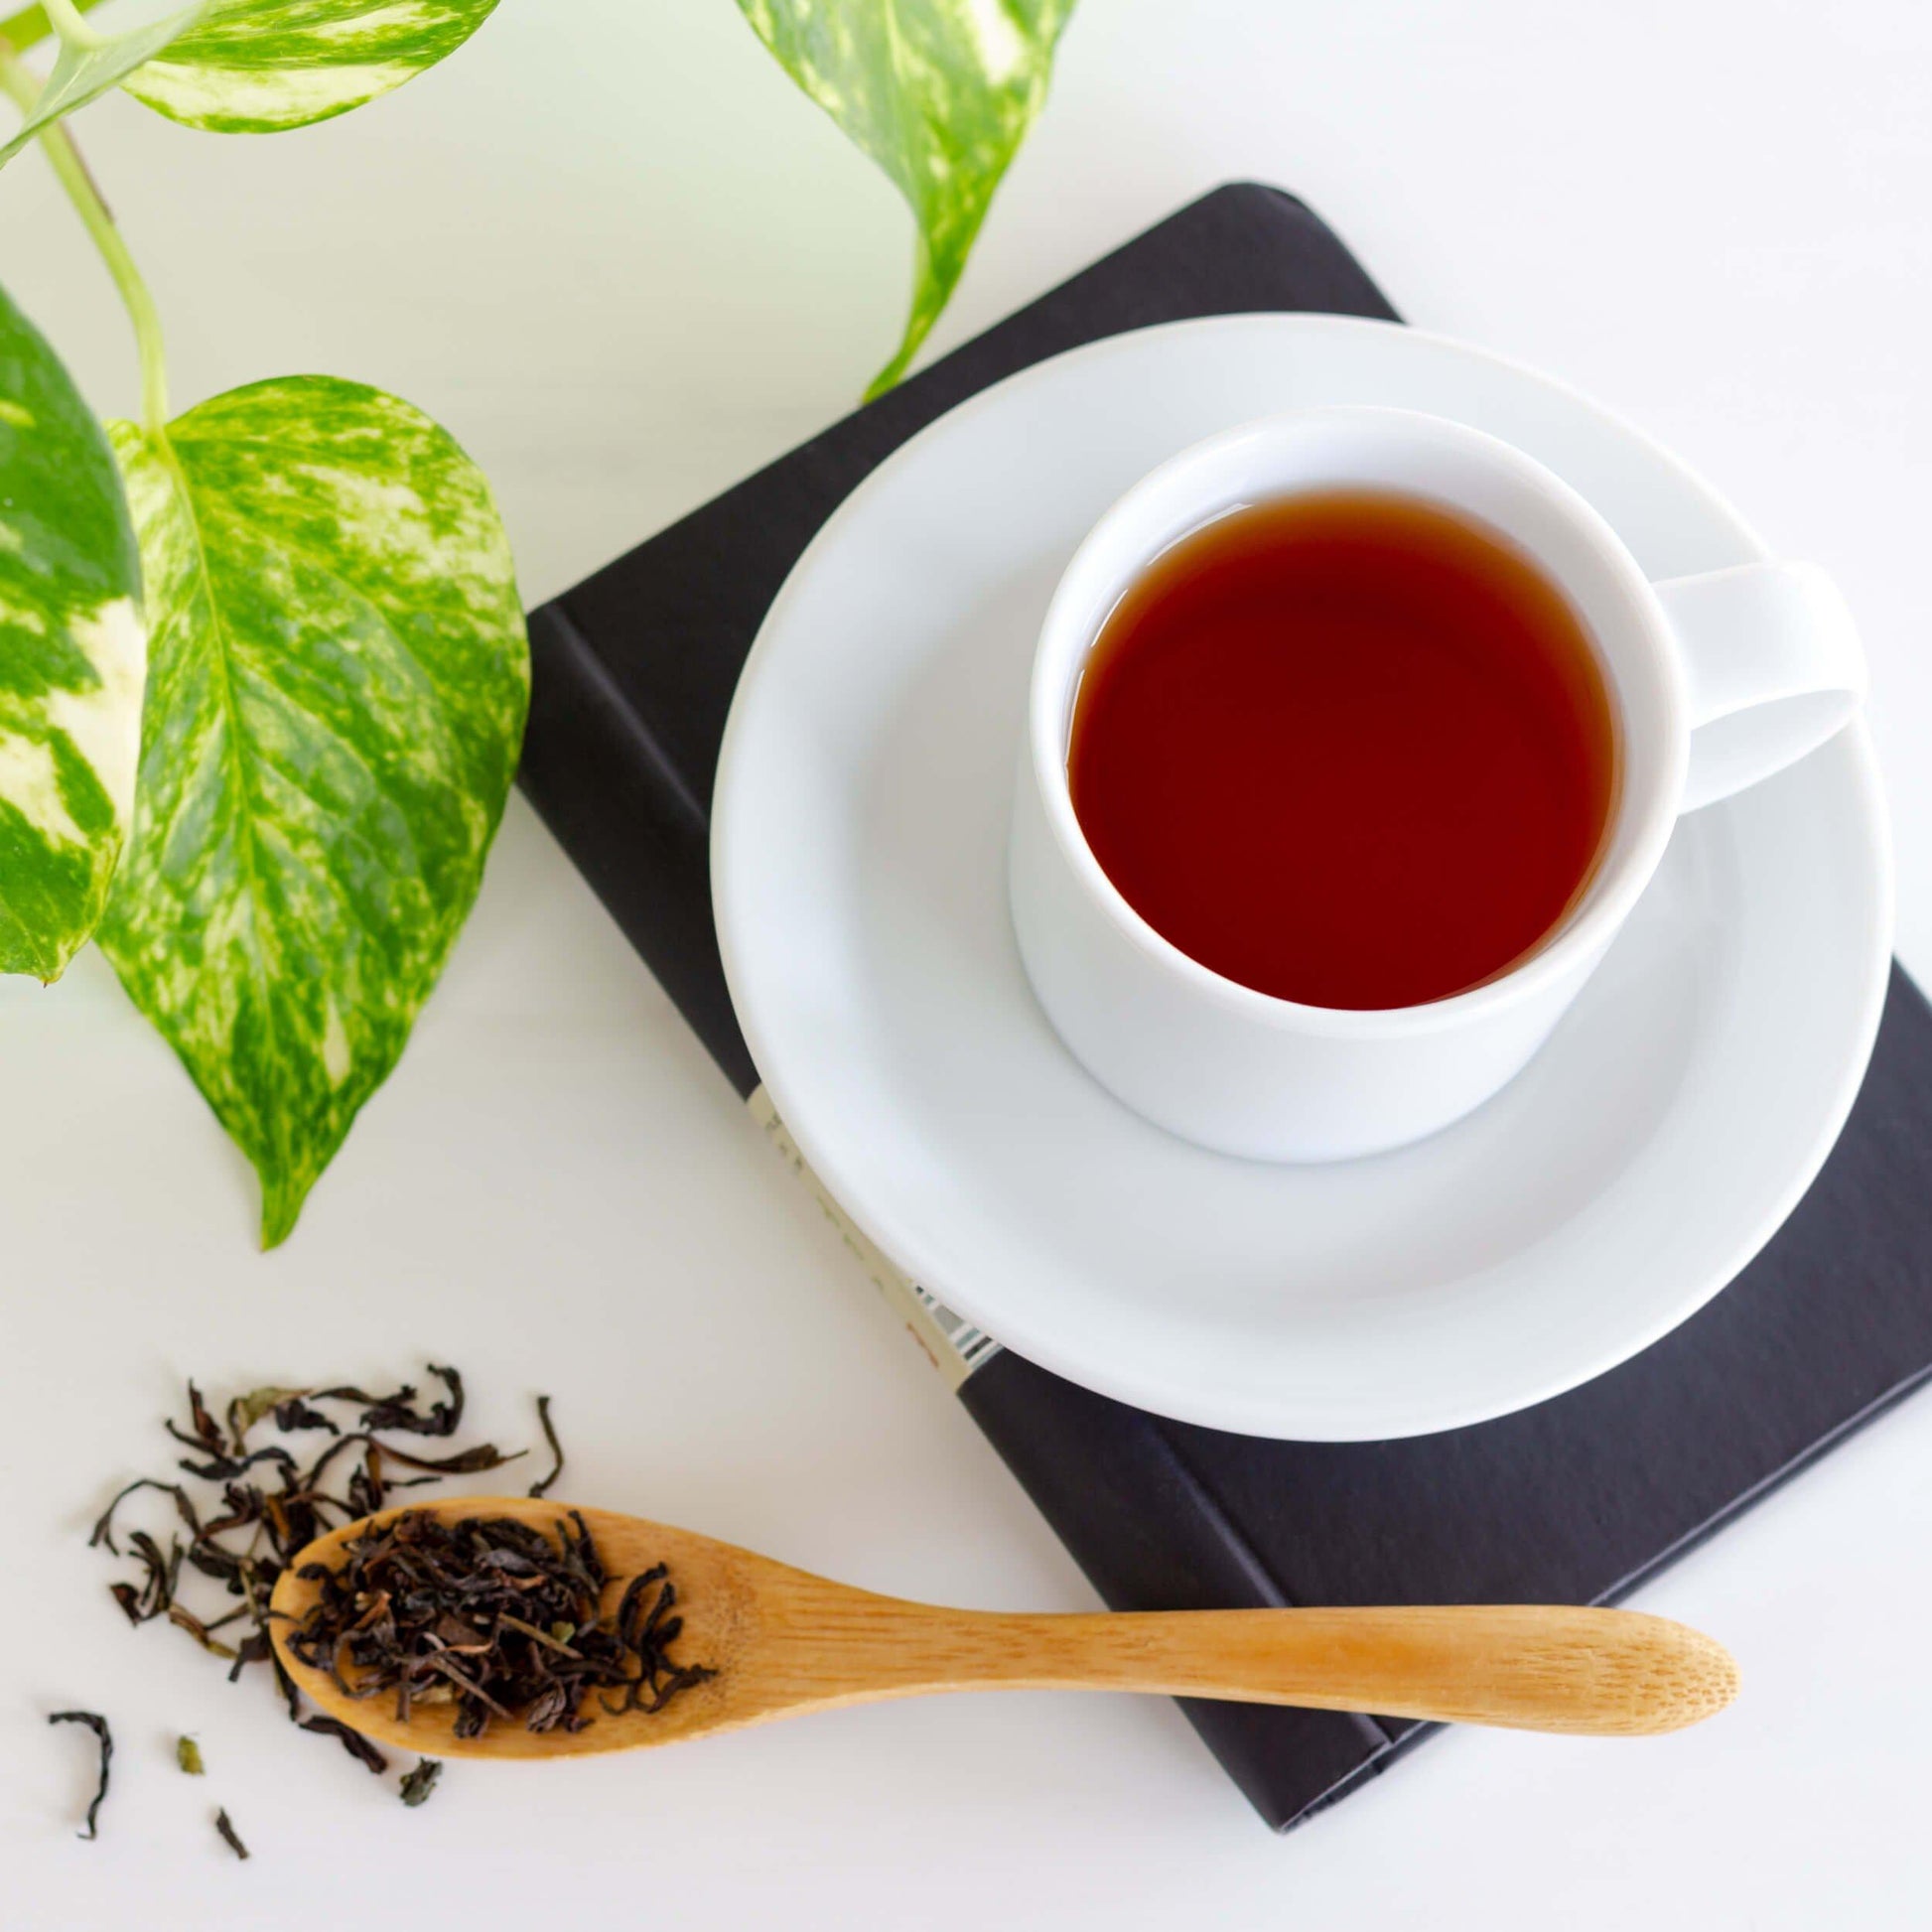 Organic Darjeeling Black Tea shown from above as brewed tea in a white teacup and saucer, displayed on a black book with a wooden spoon of loose tea leaves in front